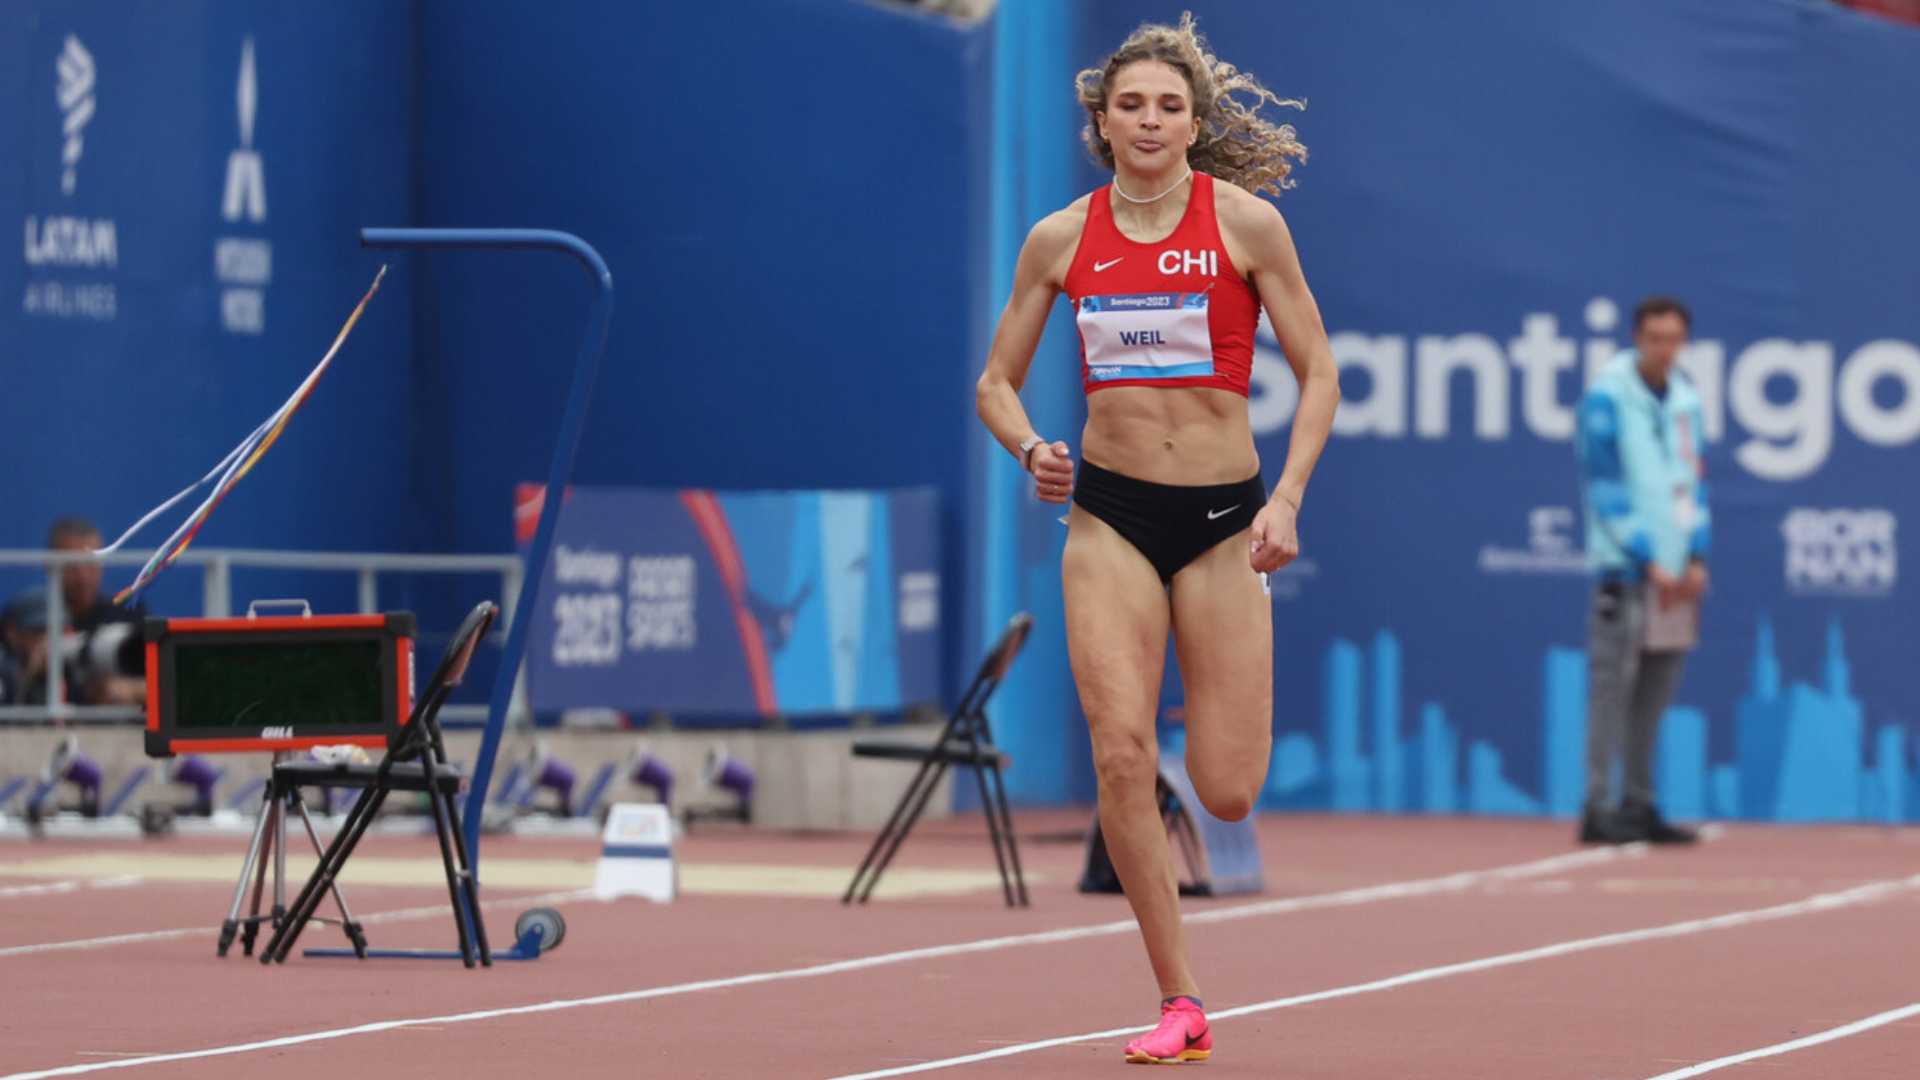 Chile's Martina Weil advances to the 400 meters final with the best time